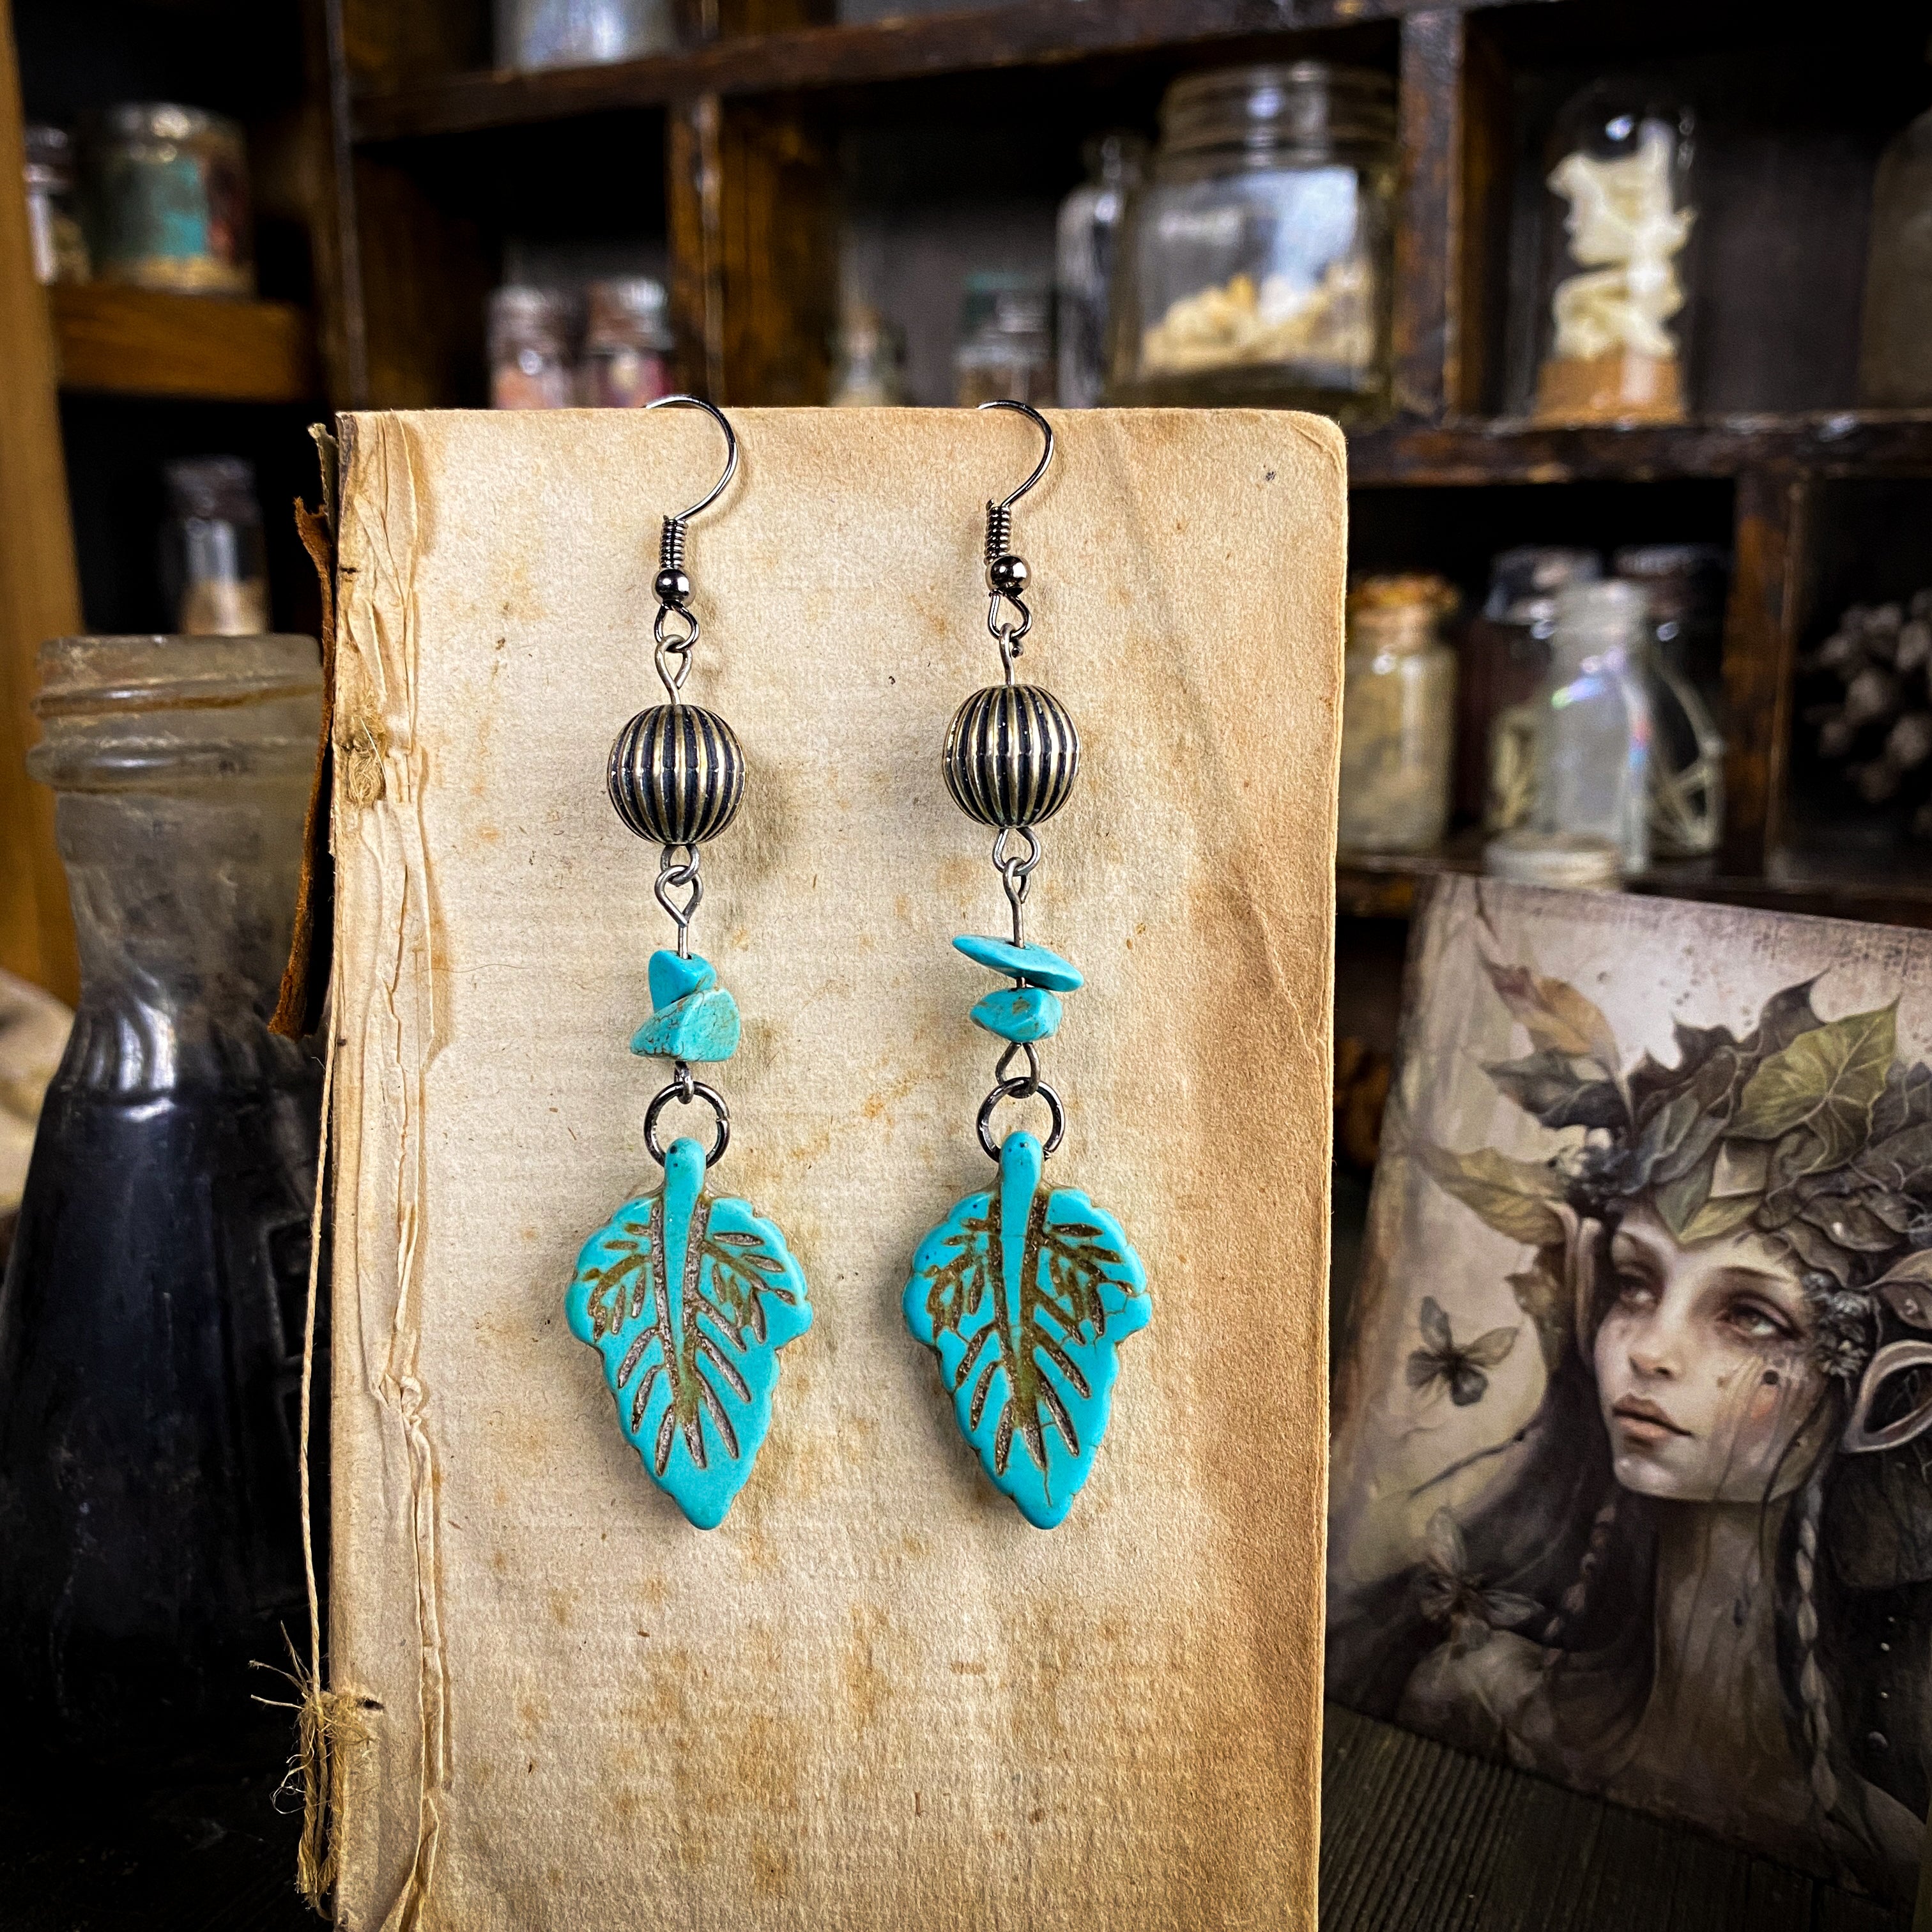 Enchanted Forest - Hand Crafted Earrings